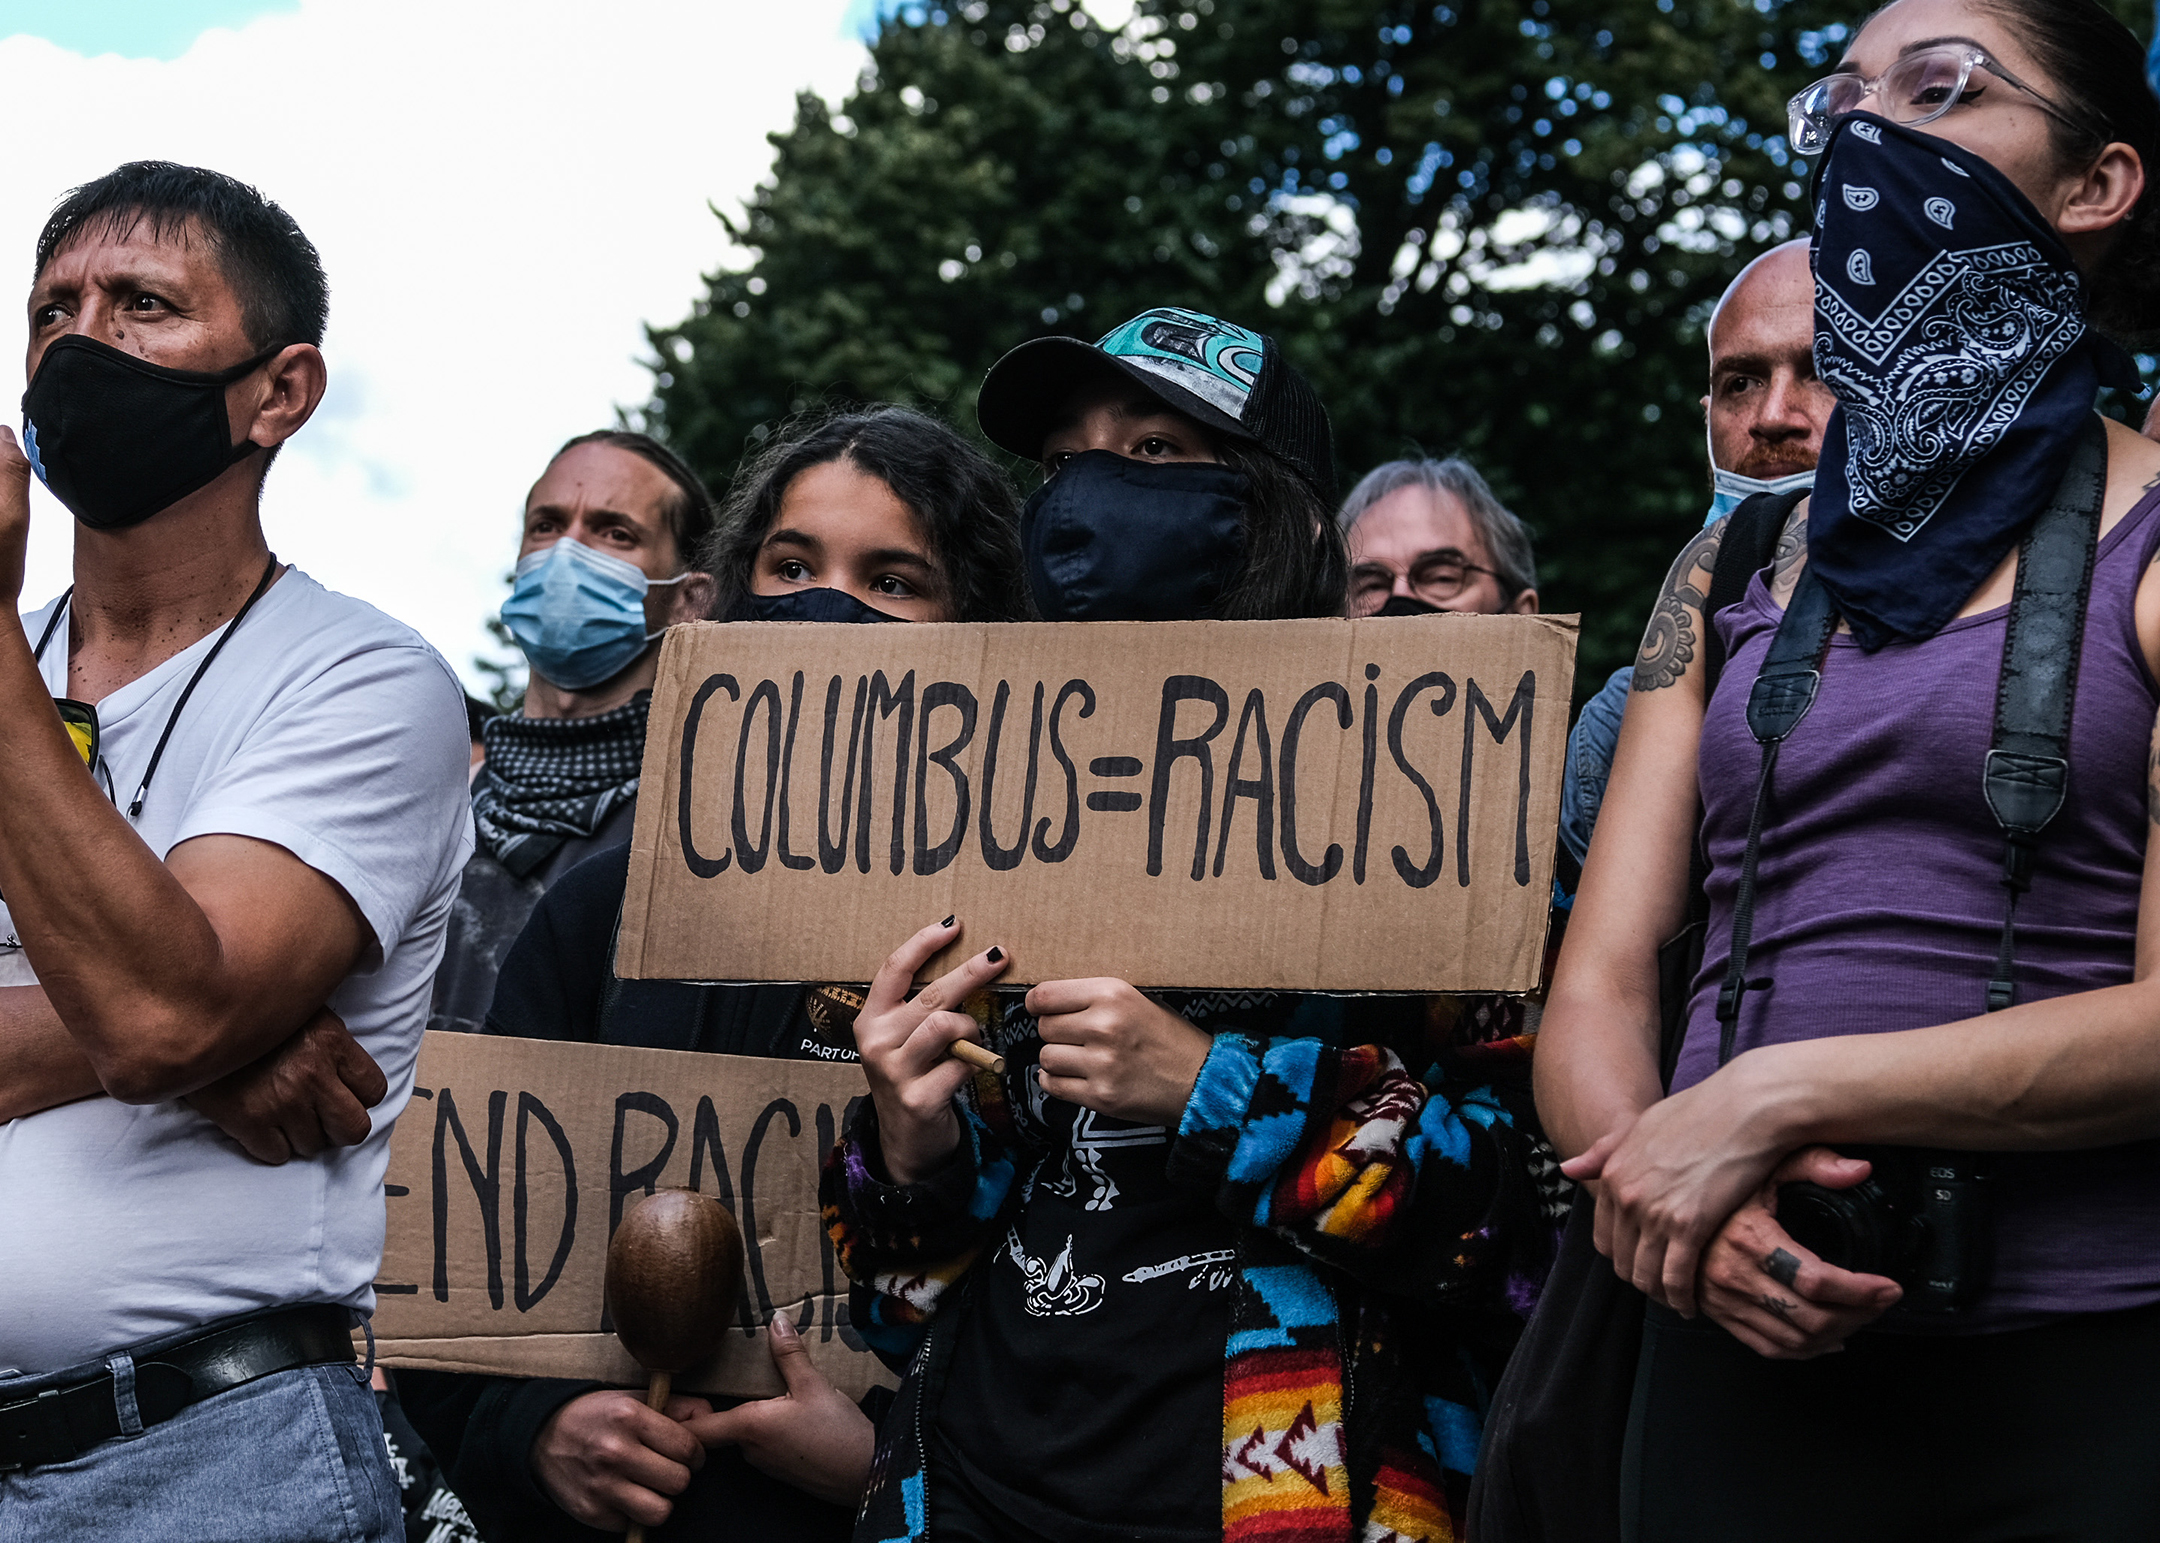 A group of protesters wearing facemasks hold handmade signs that read columbus=racist